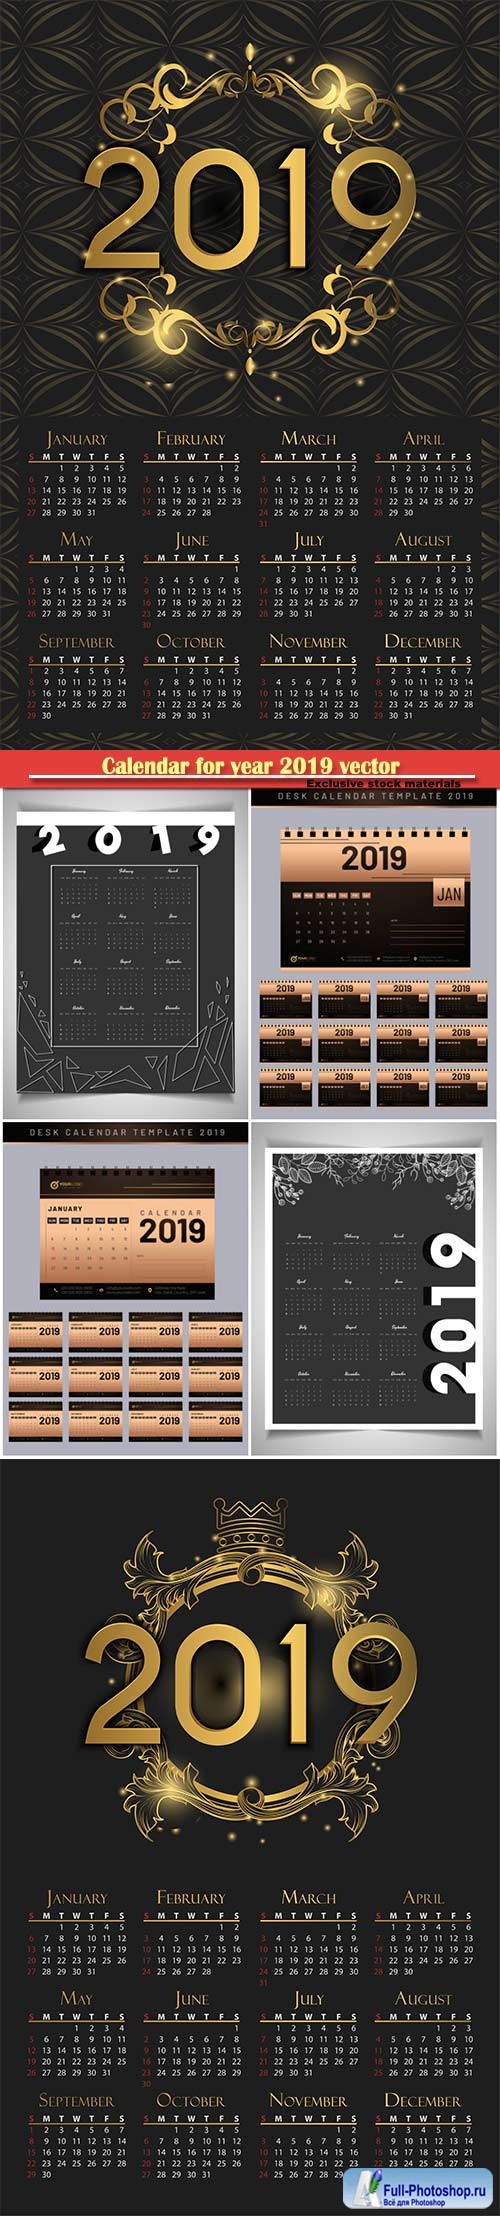 Calendar for year 2019 vector luxury concept with golden color